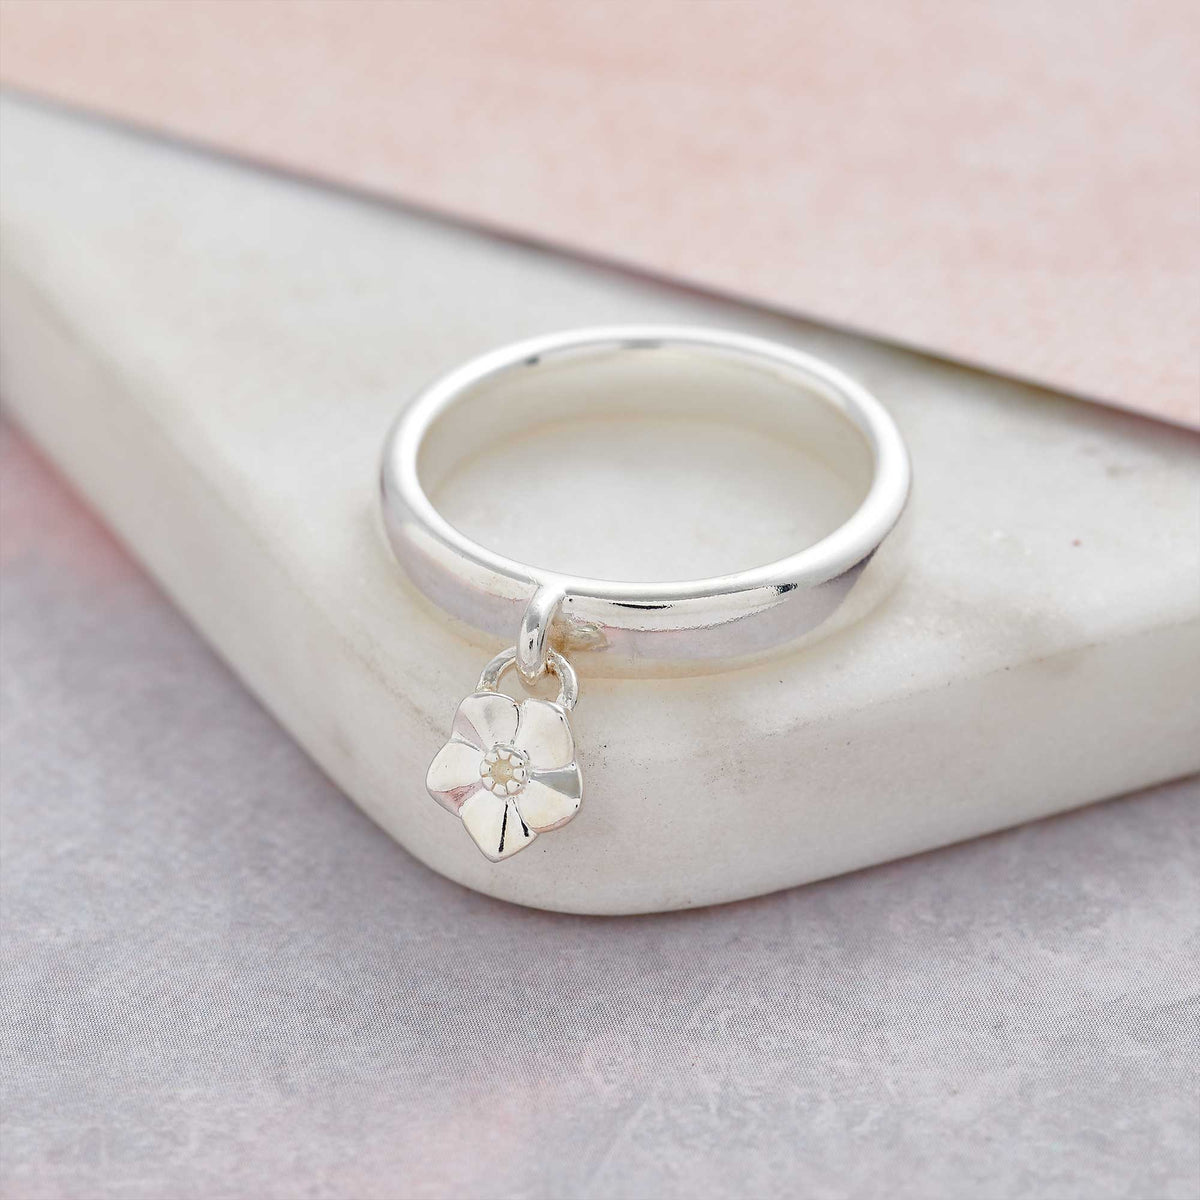 Solid silver forget me not flower charm ring scarlett jewellery